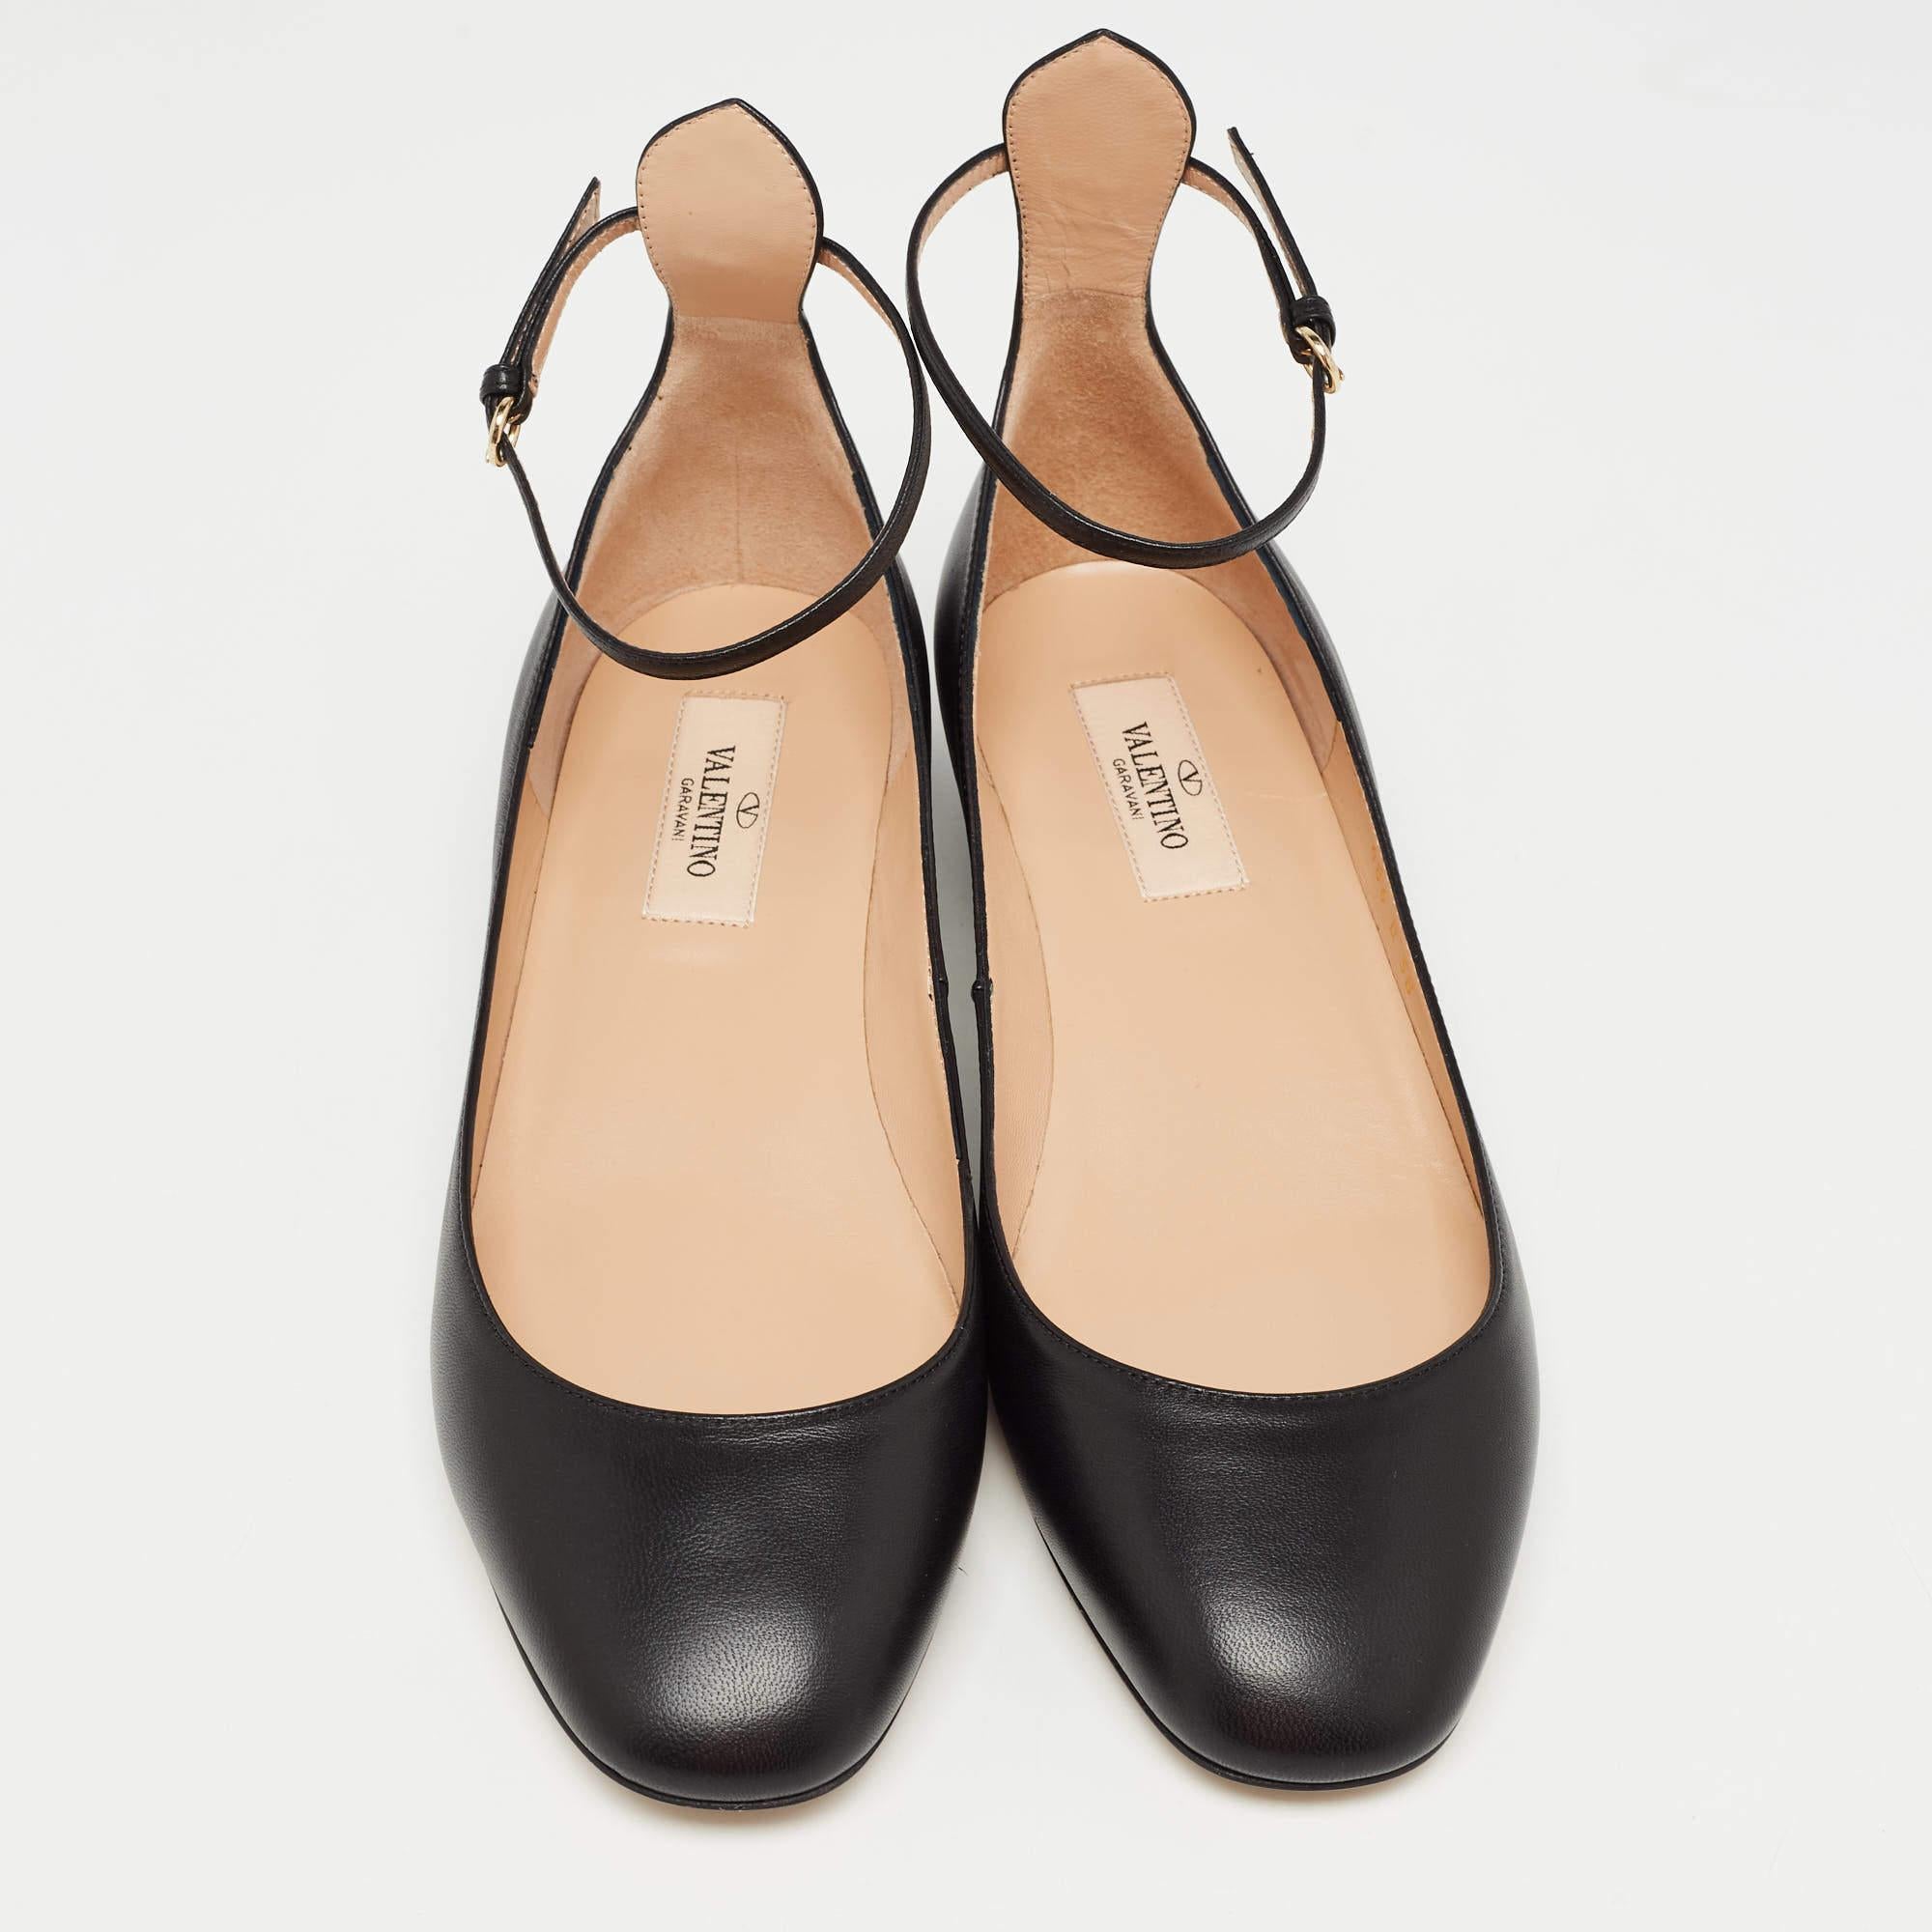 Defined by comfort and effortless style, no wardrobe is ever complete without a pair of chic ballet flats. This pair is lovely to look at and is equipped with elements like a comfortable insole and a durable sole.

Includes
Original Dustbag,